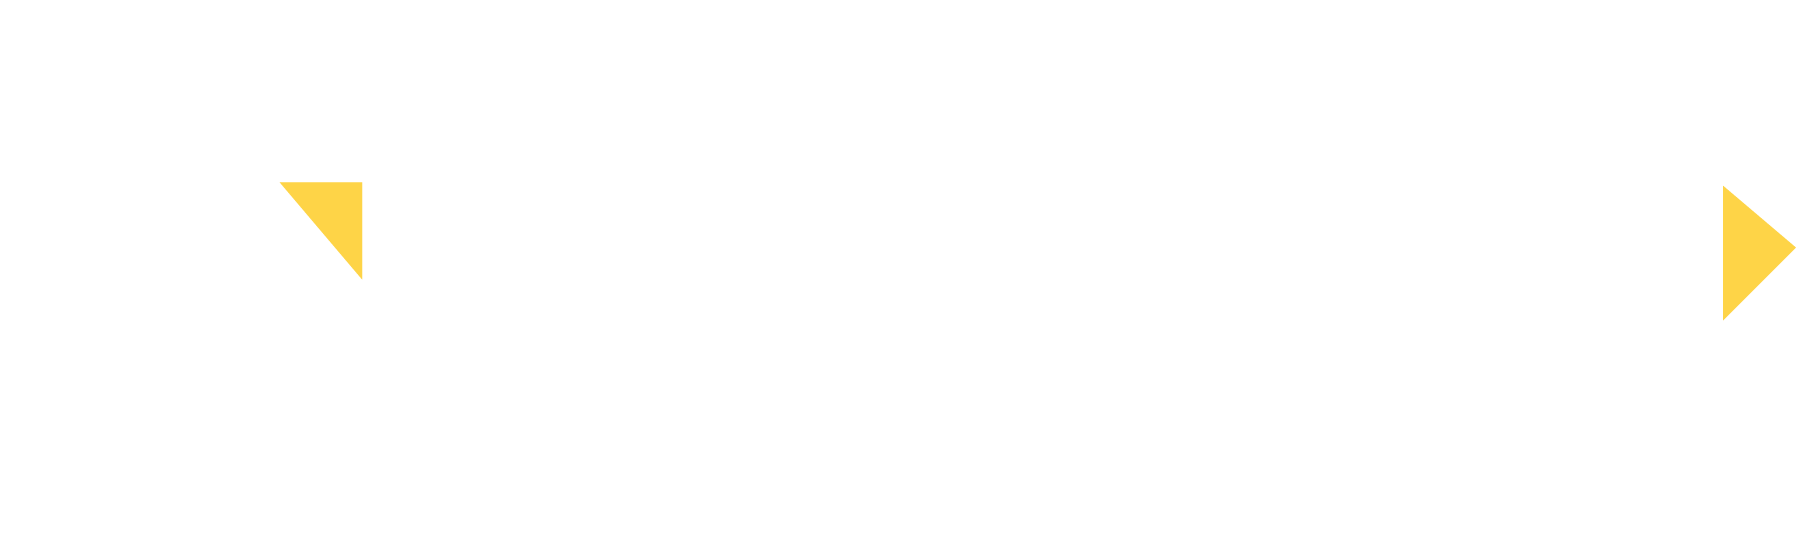 logo stay home developpement